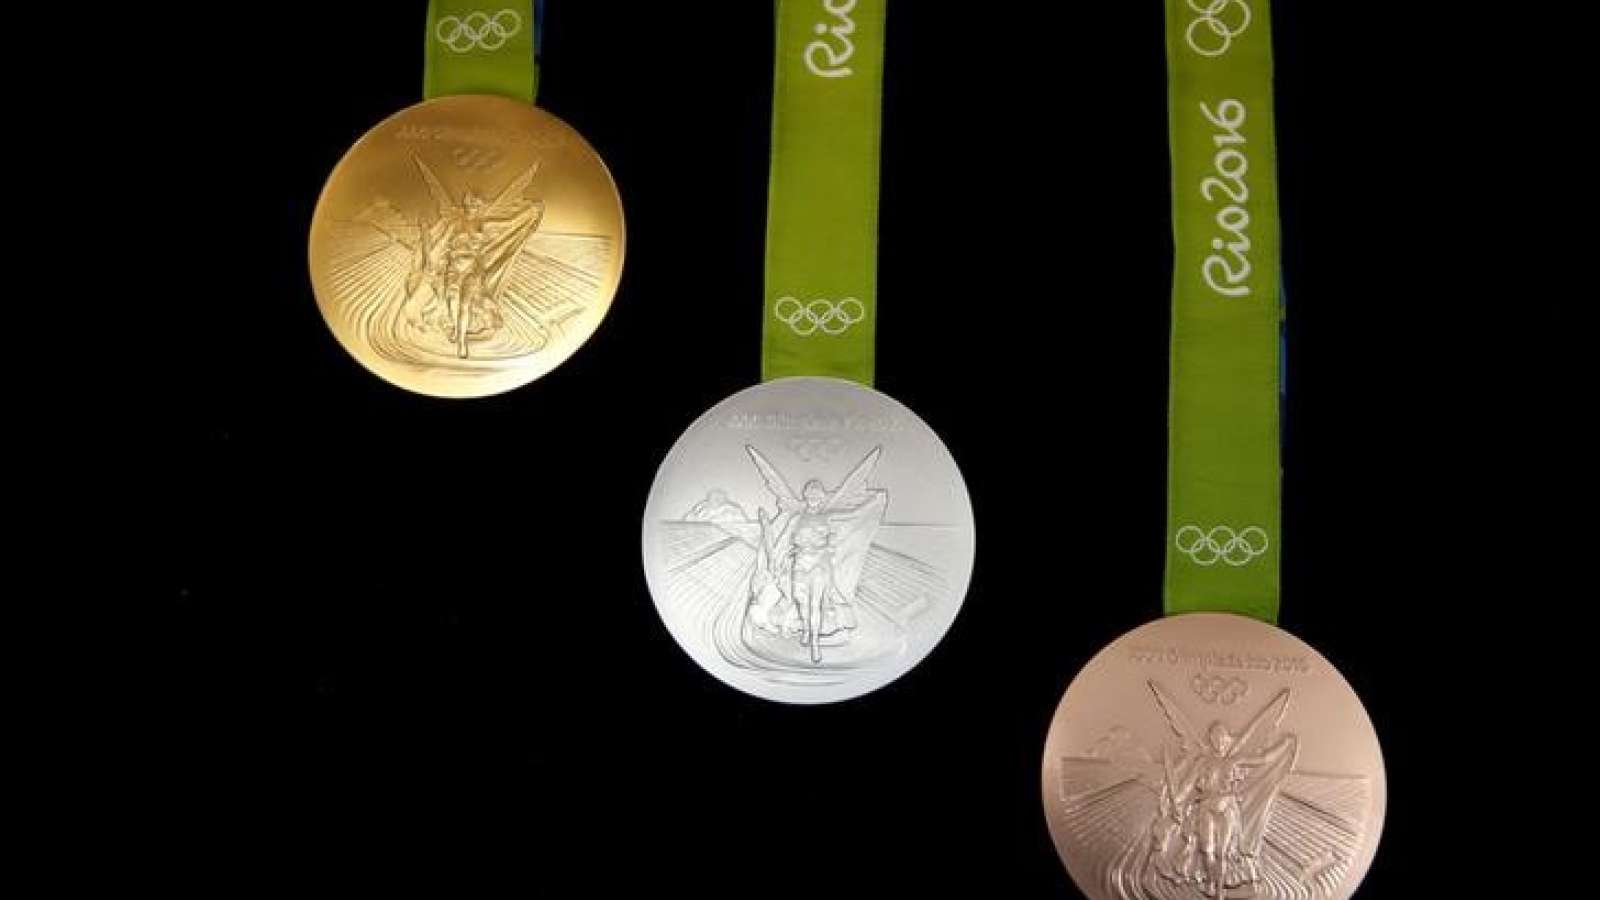 Tokyo Olympics Organizers Ask Public to Help Create Recycled Medals